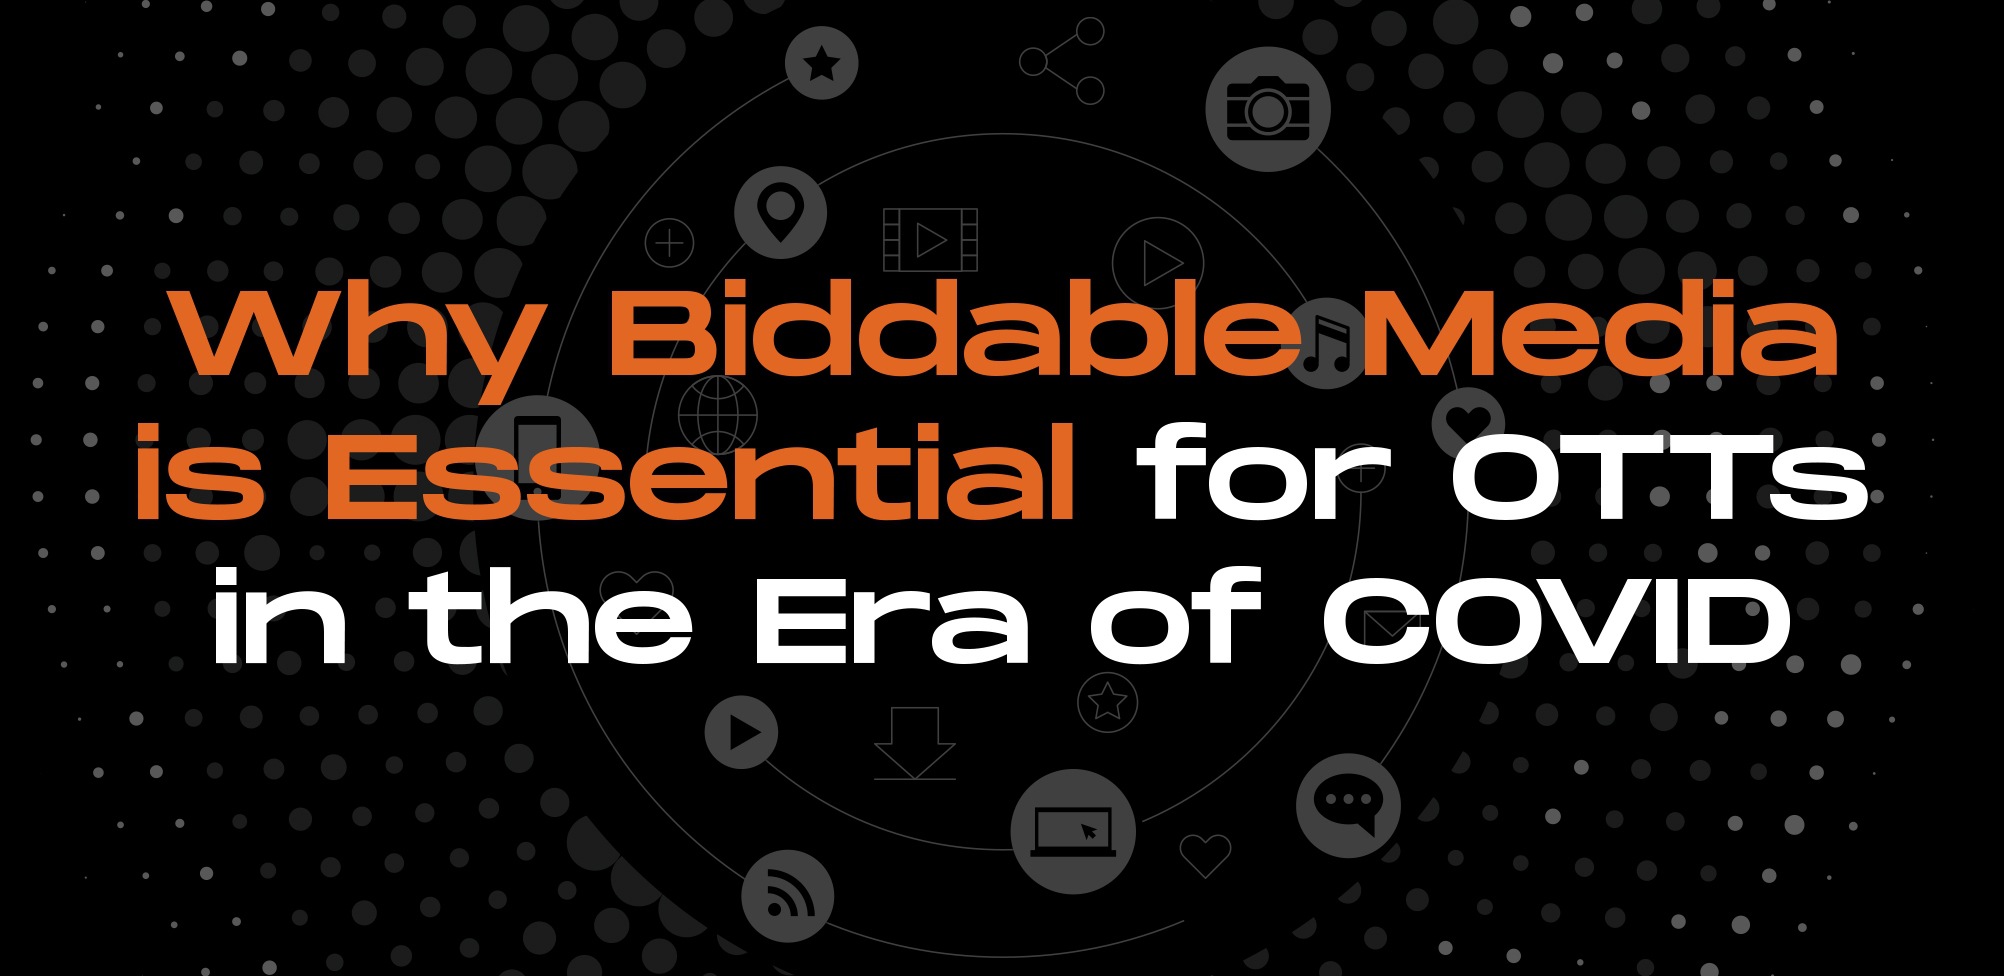 Content is Gold, but Reach is Silver: Why Biddable Media is essential for OTTs in the era of COVID